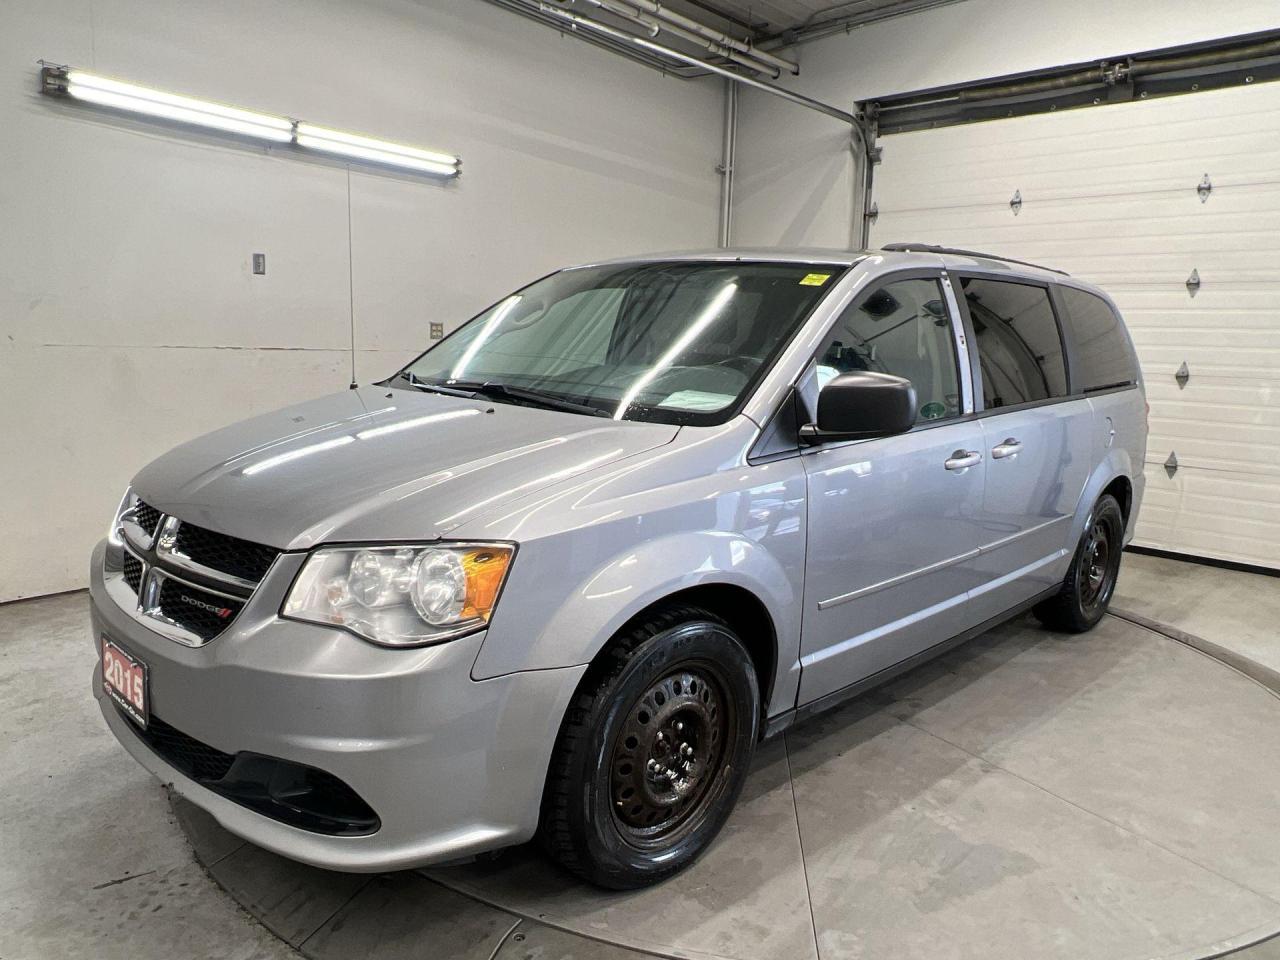 Used 2015 Dodge Grand Caravan SXT 7-PASS STOW 'N GO DUAL-ZONE A/C for Sale in Ottawa, Ontario